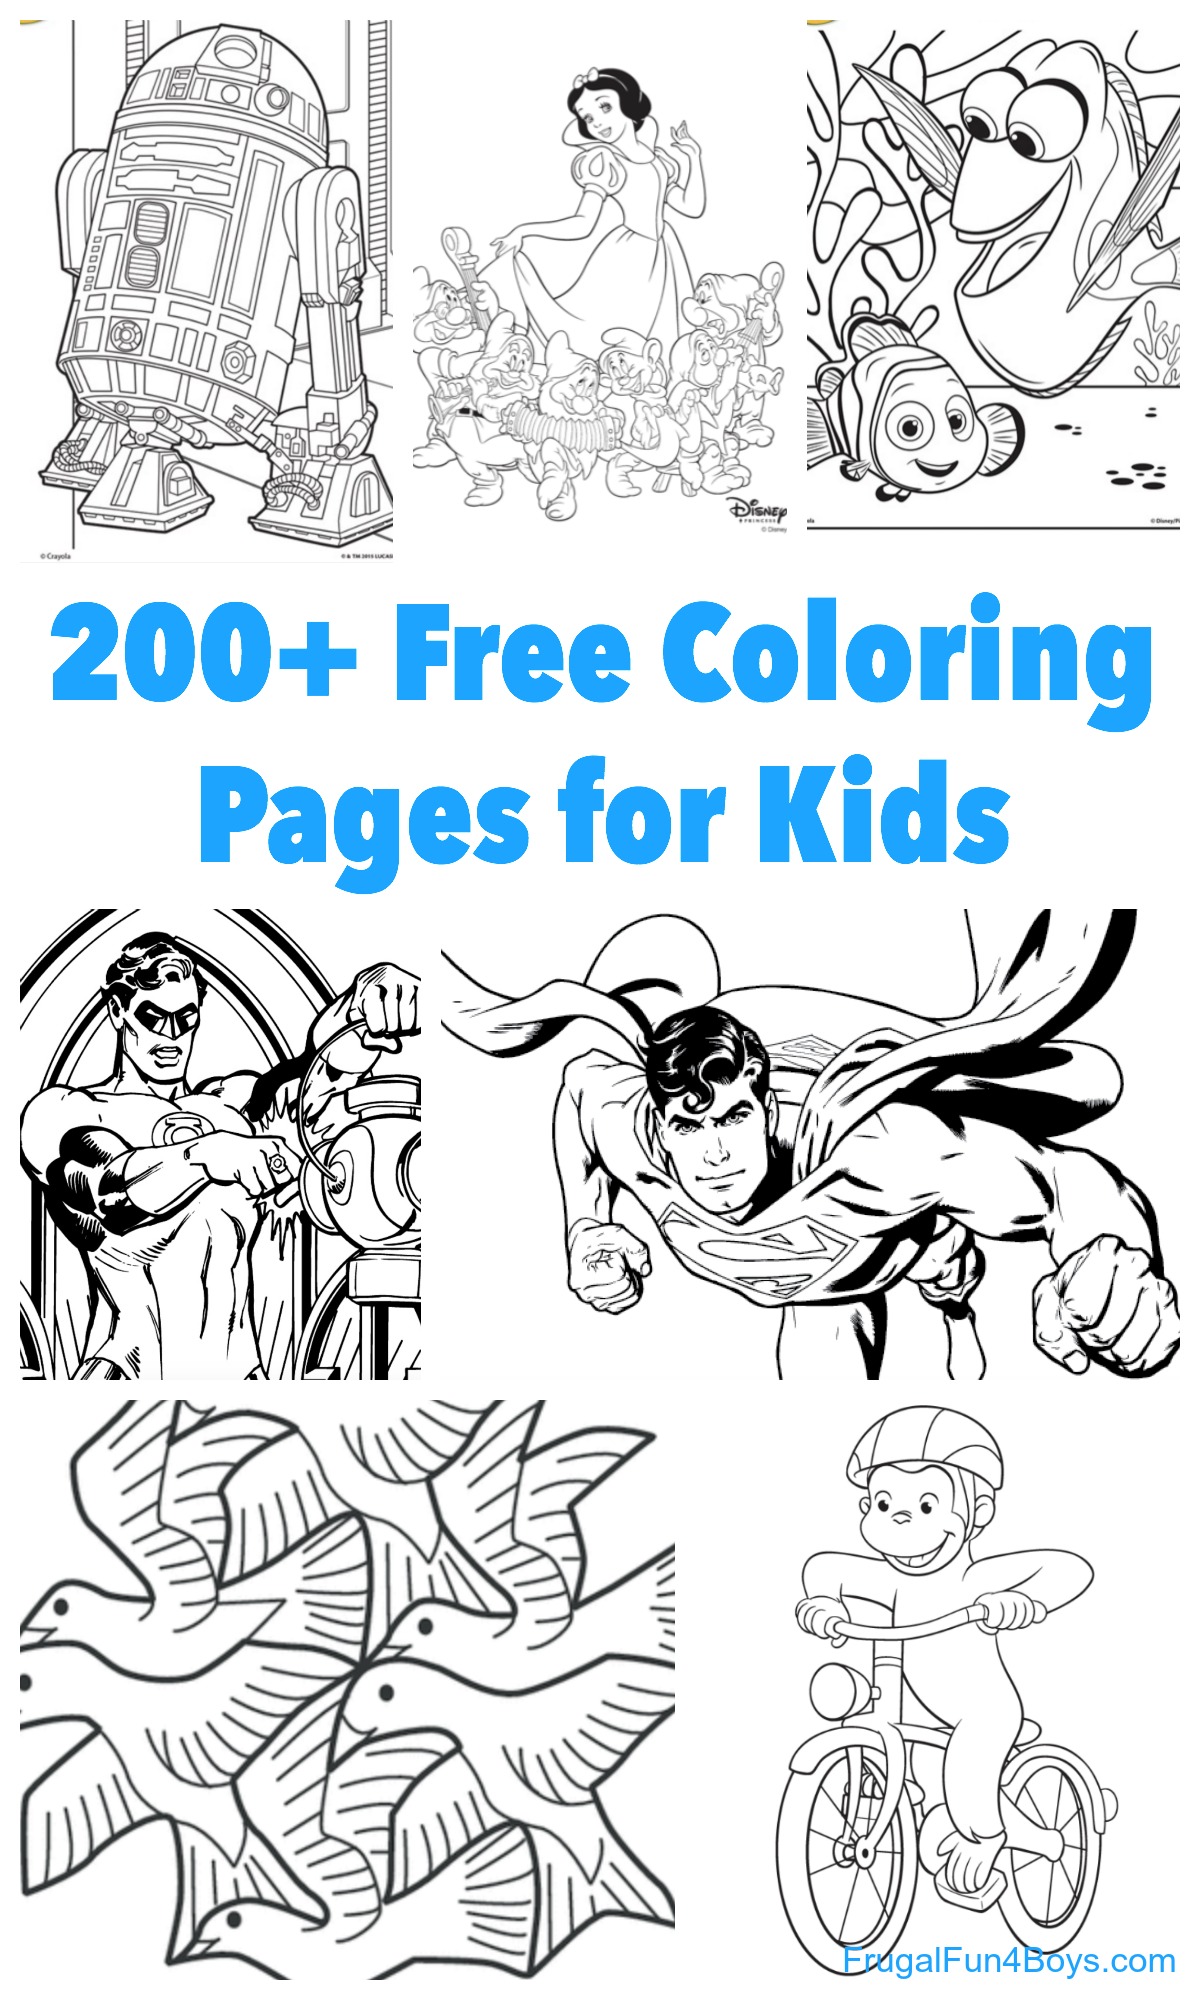 Free Printable Drawings For Kids at PaintingValley com Explore